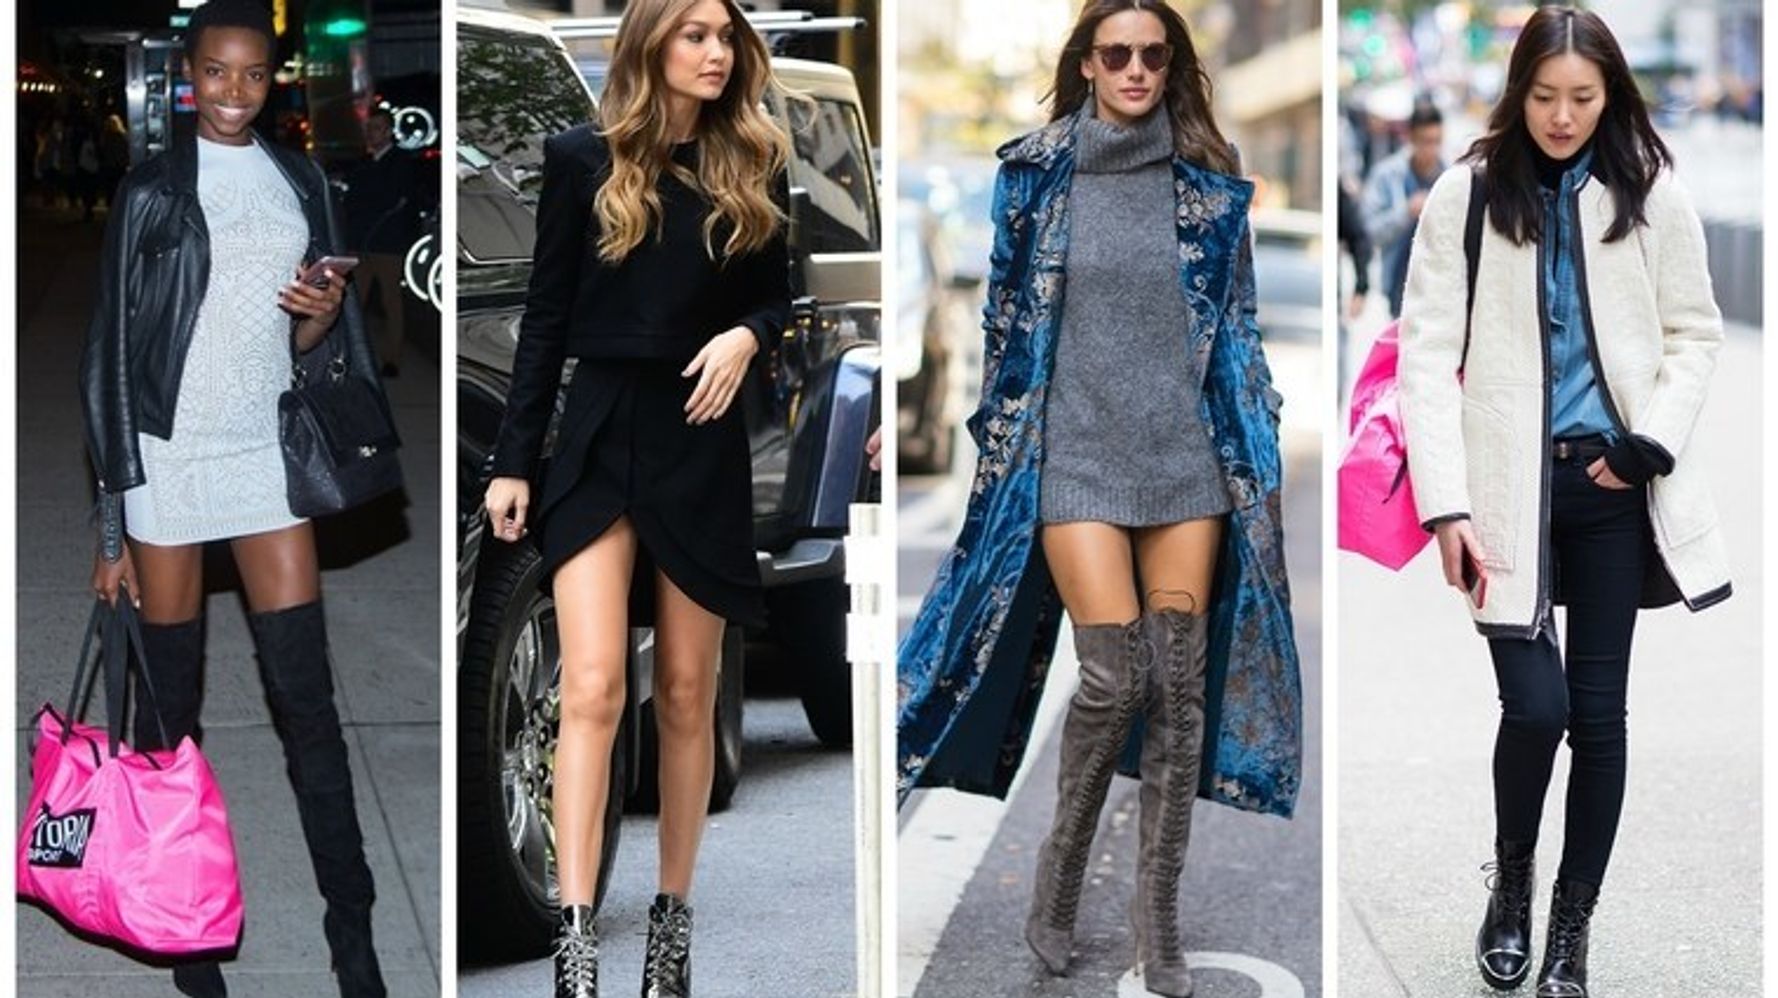 Victoria's Secret Fashion Show Fittings Street Style: See The